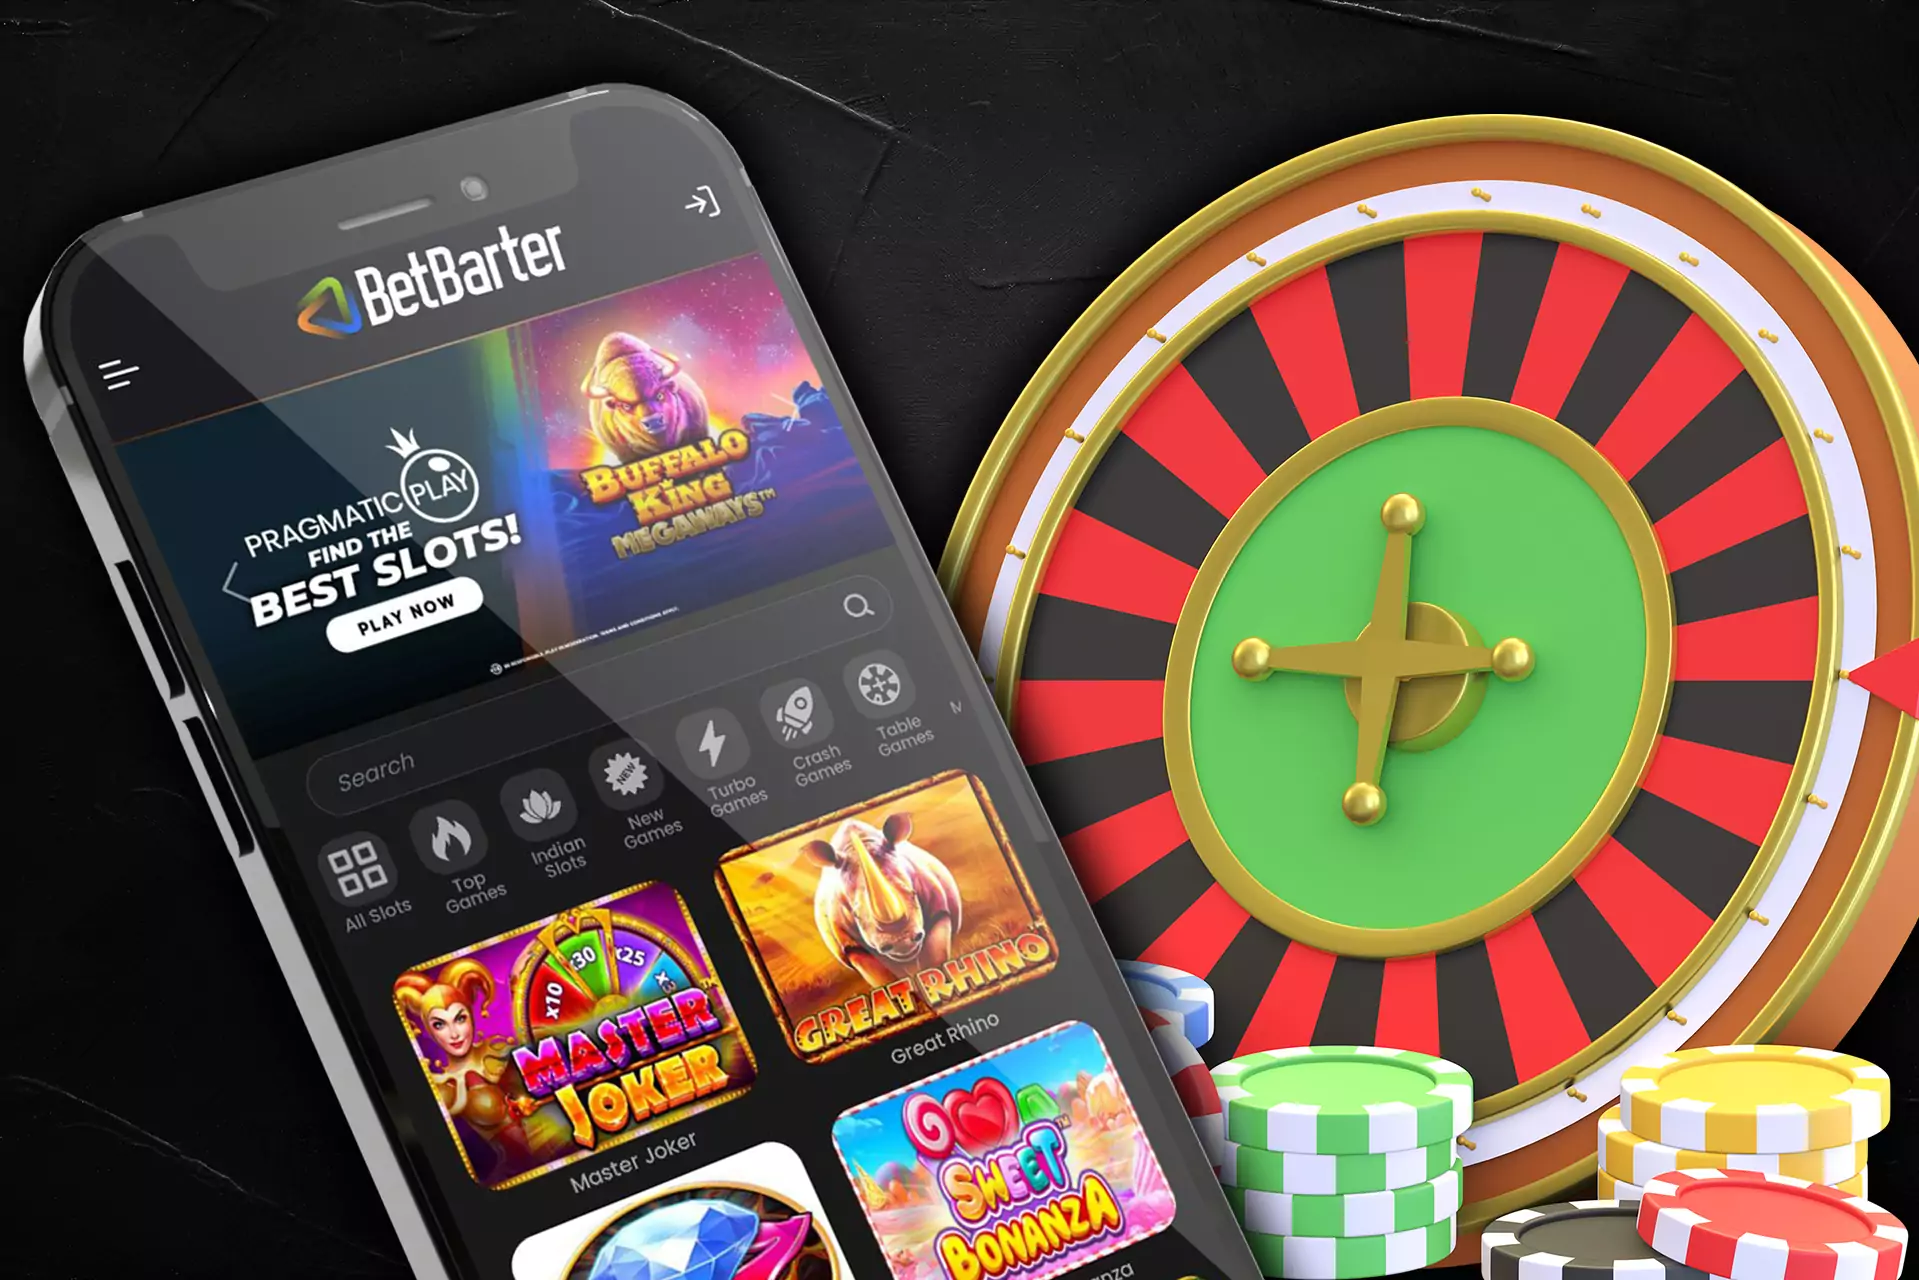 The Betbarter app supports online casino.